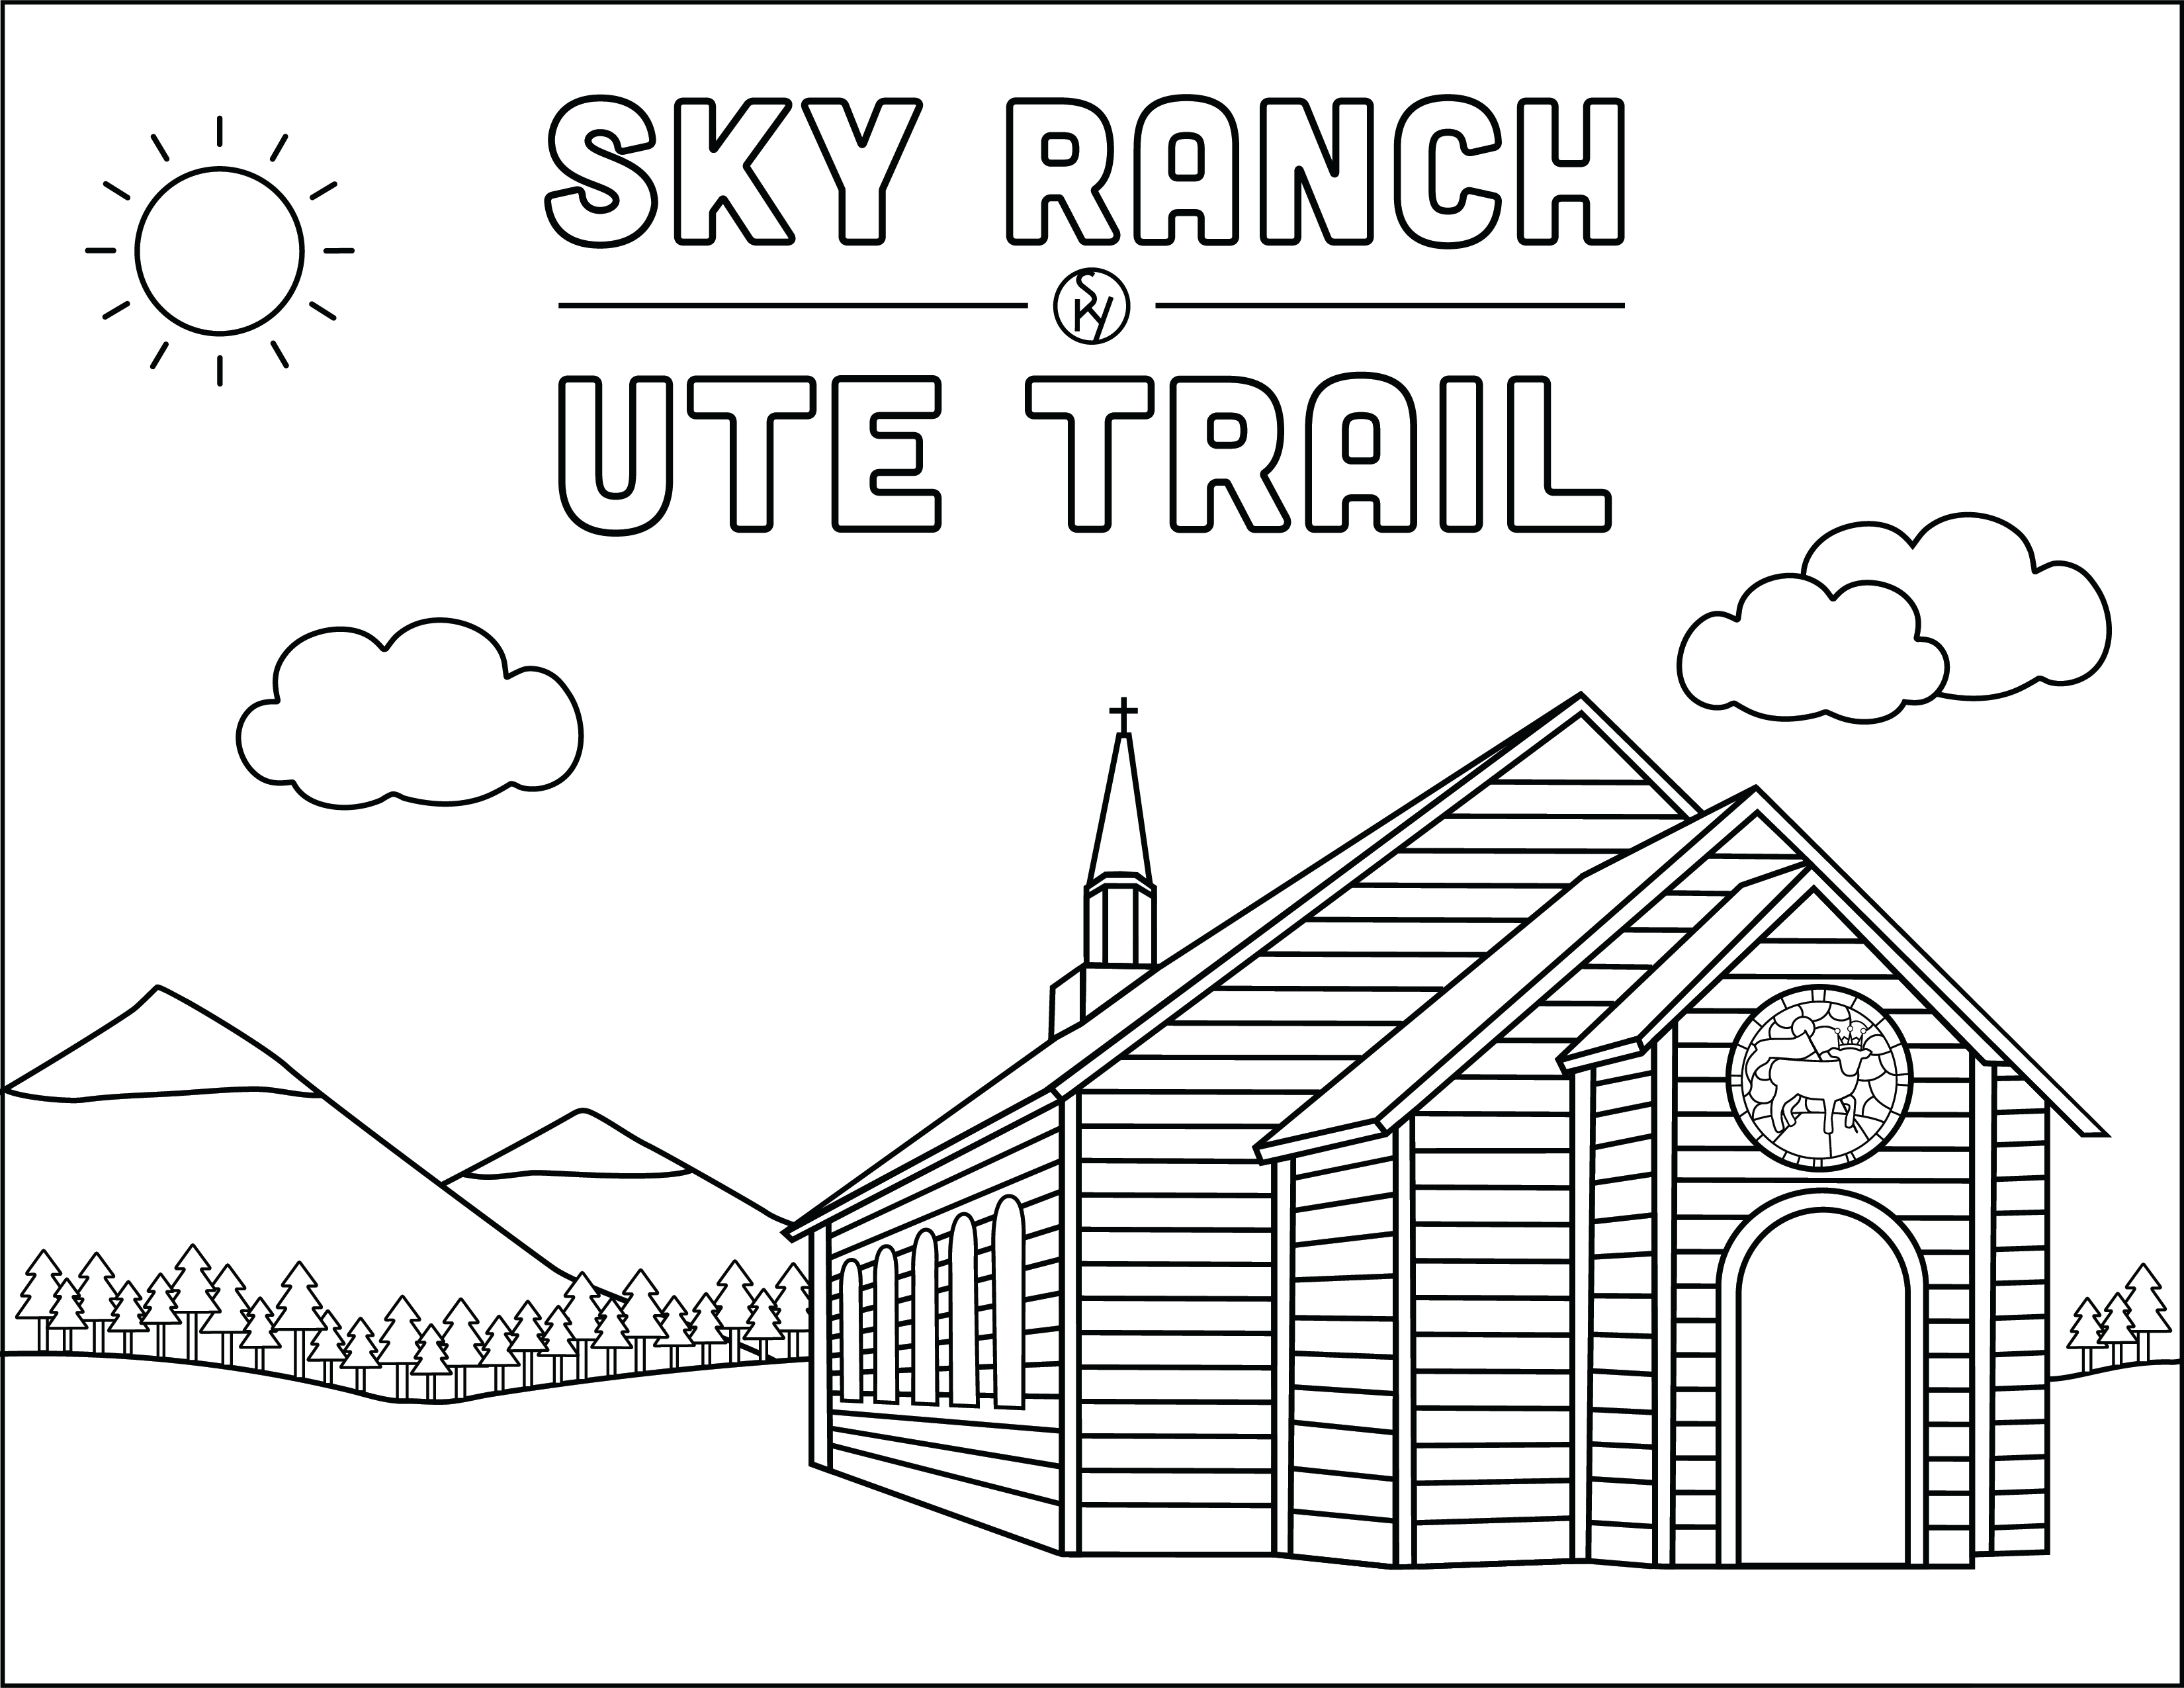 Sky ranch coloring page